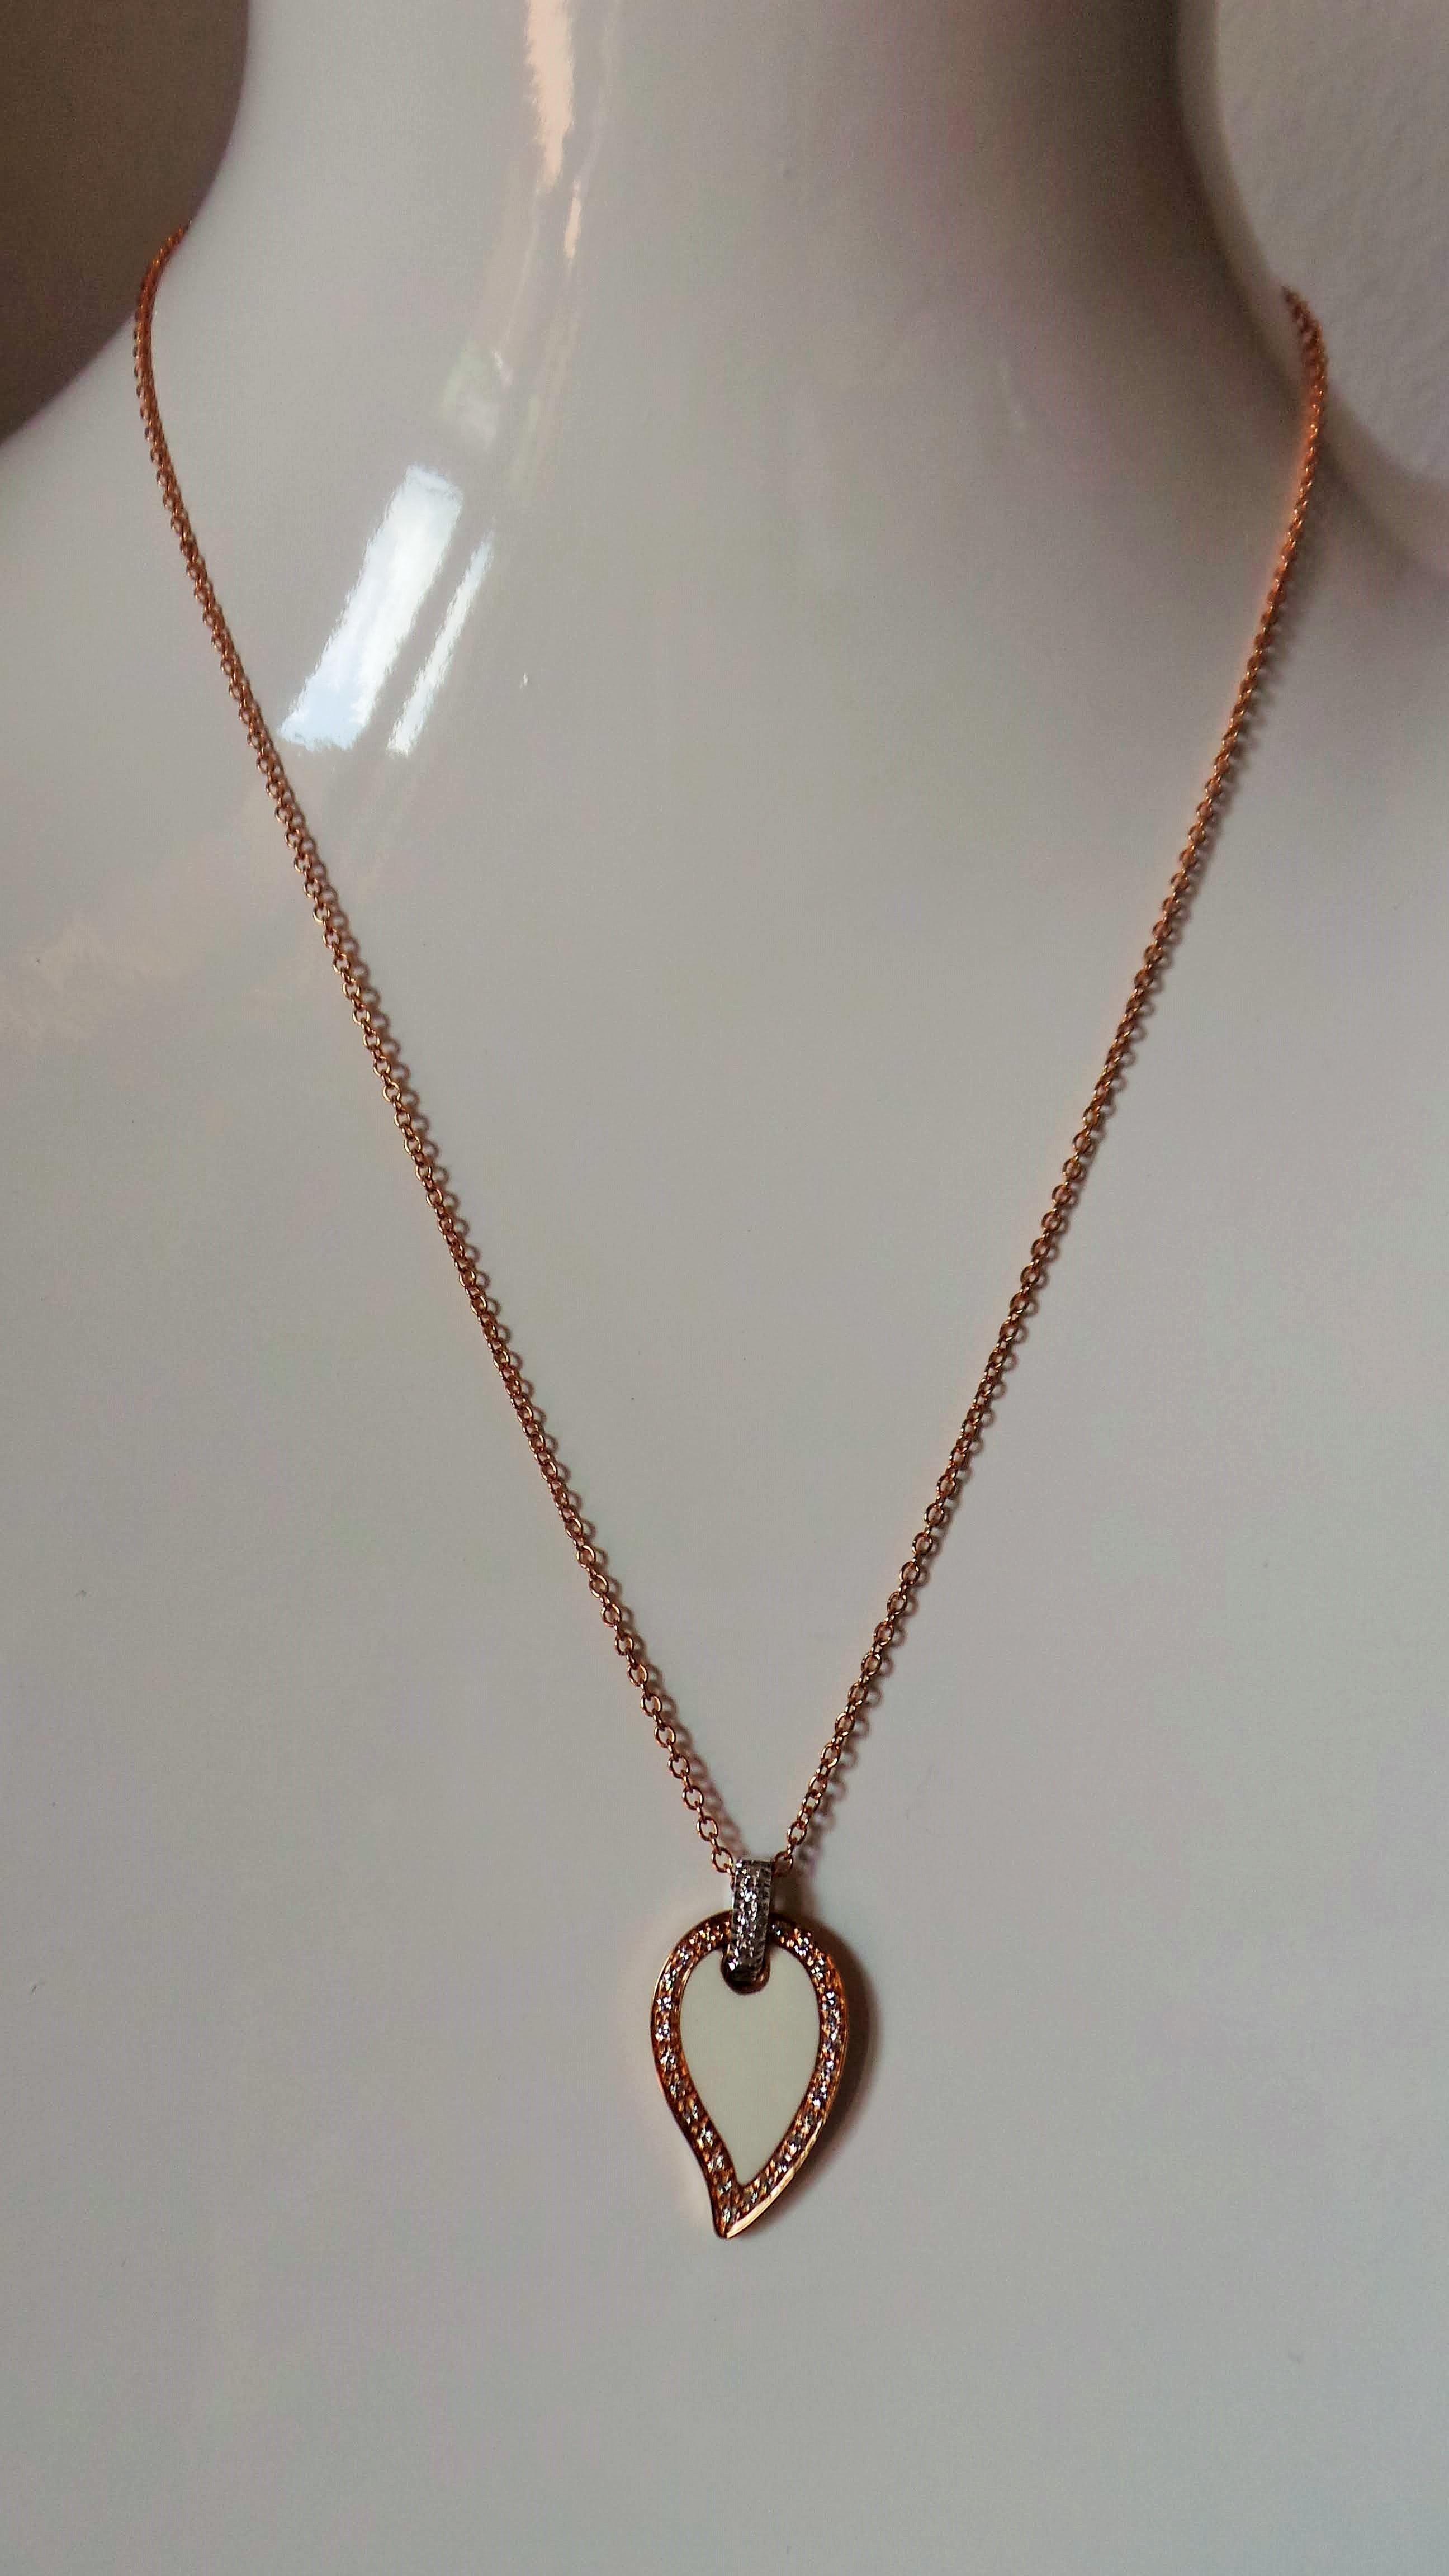 Andrea Macinai created this enamelled design for pendant and hand-set stones with 0.23 carats white diamonds cut brillant.
This enchanting pendant necklace is entirely handmade in white and rose gold. This line of pendants is very elagant and the